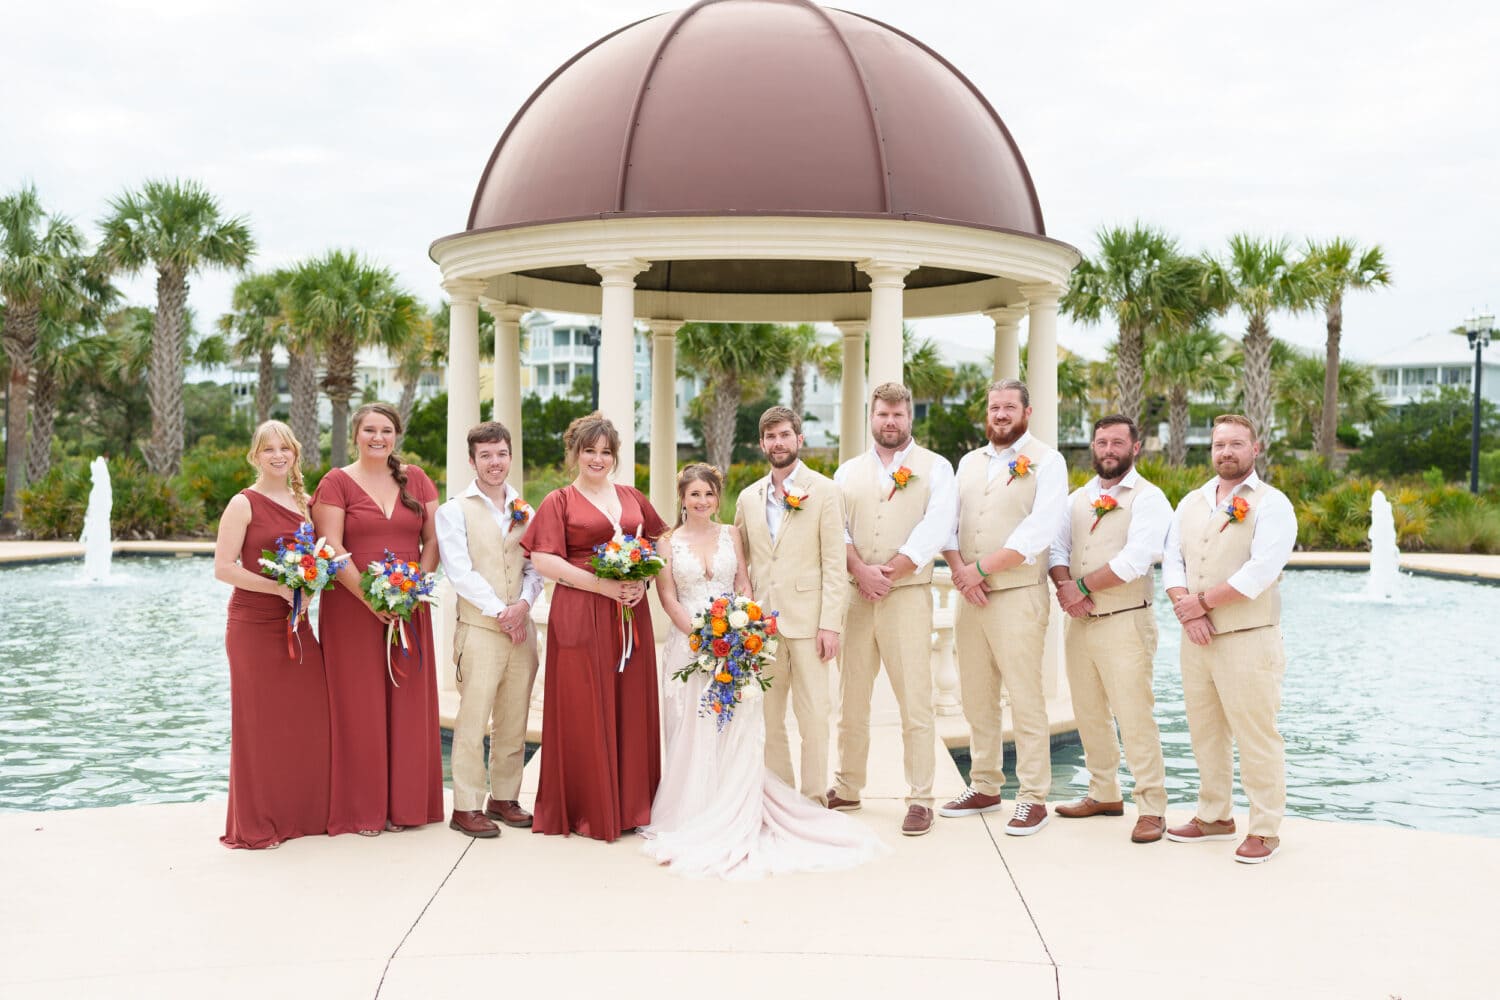 Wedding party in front of the gazebo - 21 Main Events - North Myrtle Beach